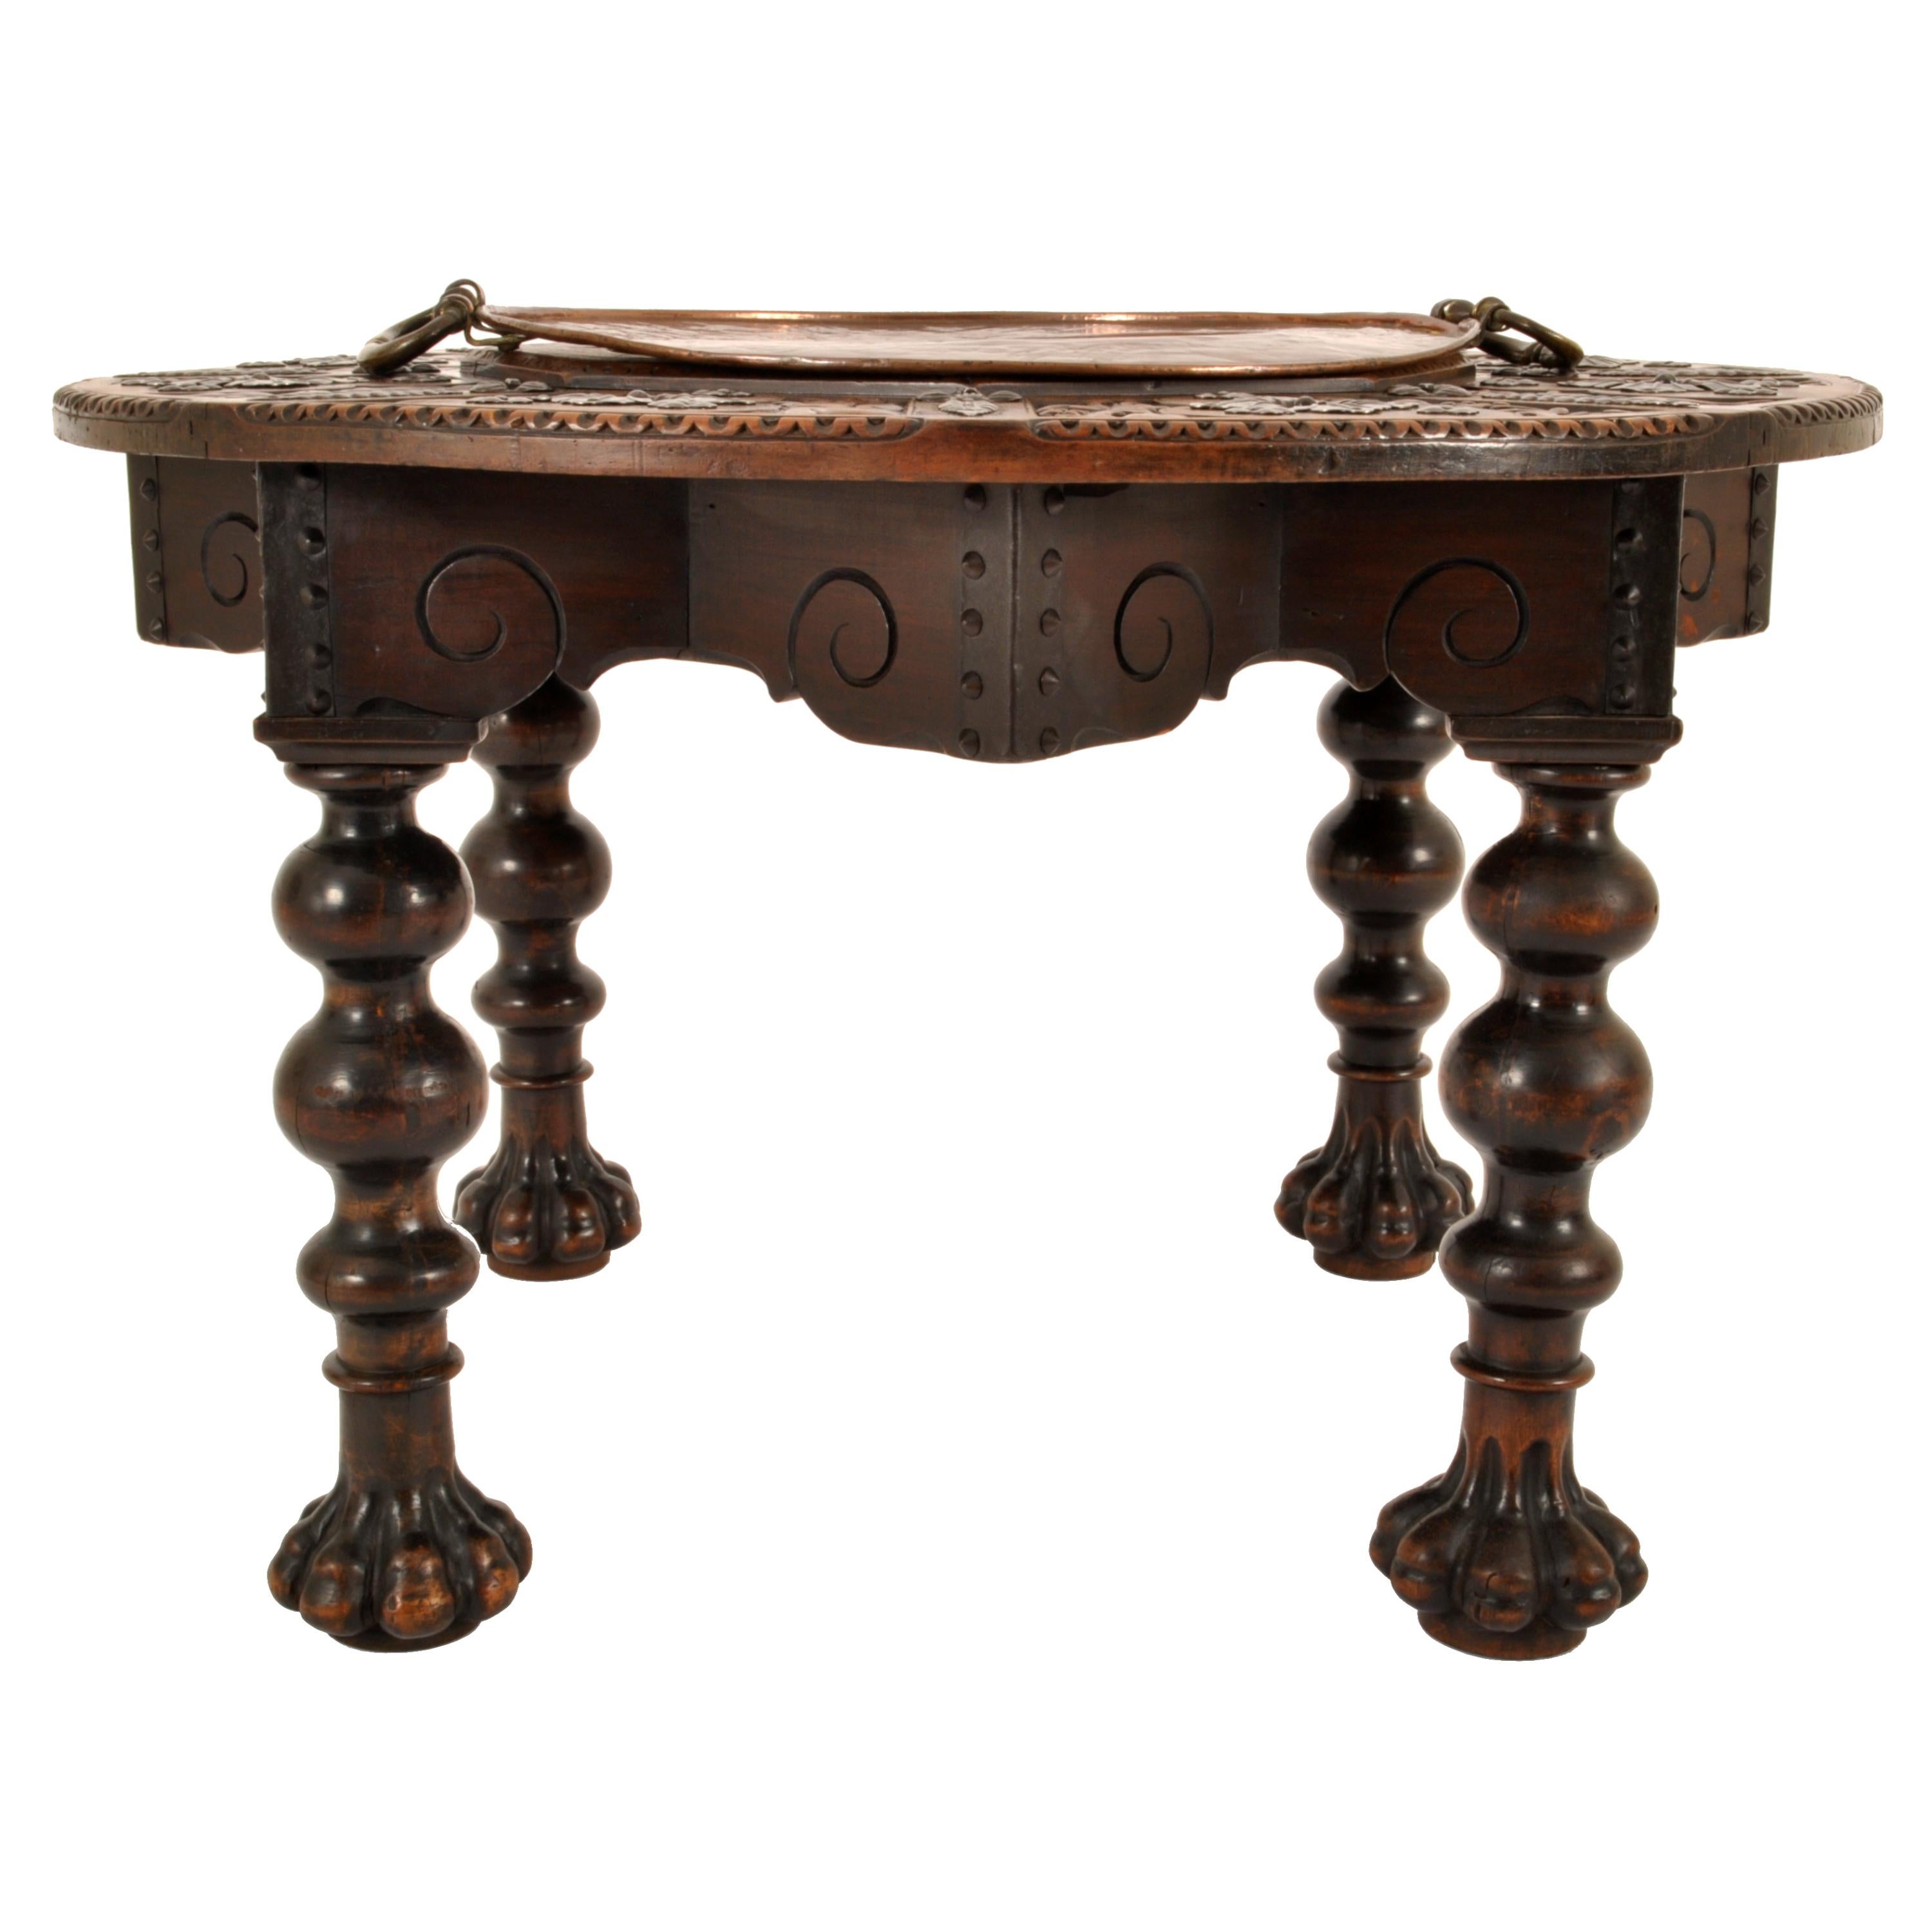 Late 19th Century Antique 17th Century Style Spanish Walnut Brass Iron Warming Brazier Table 1880 For Sale